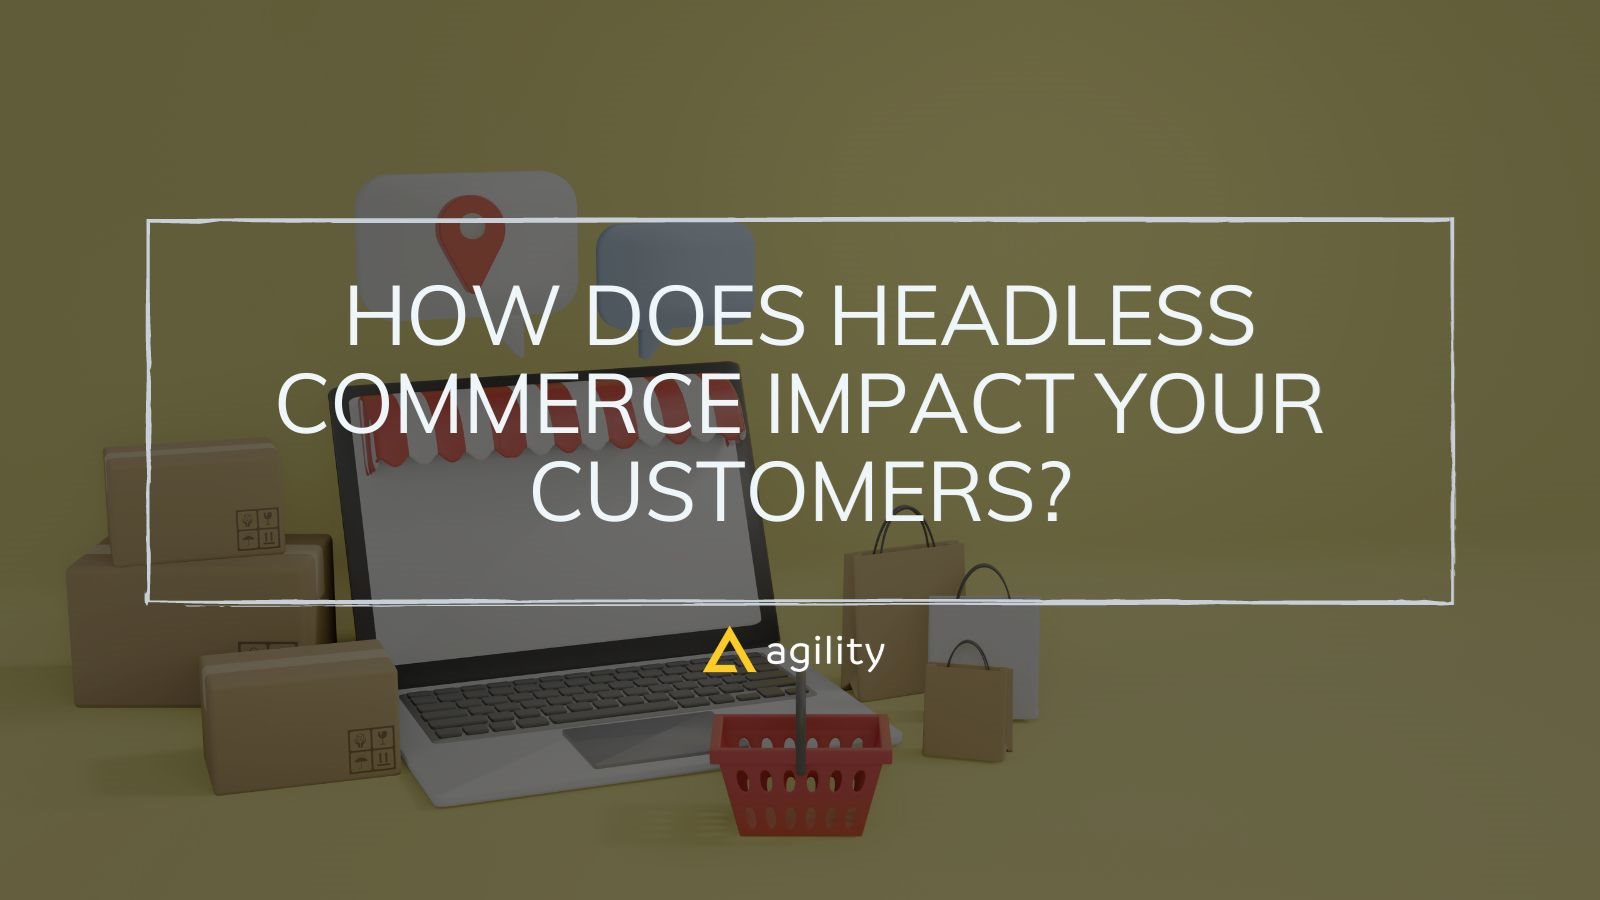 How Does Headless Commerce Impact Your Customers?